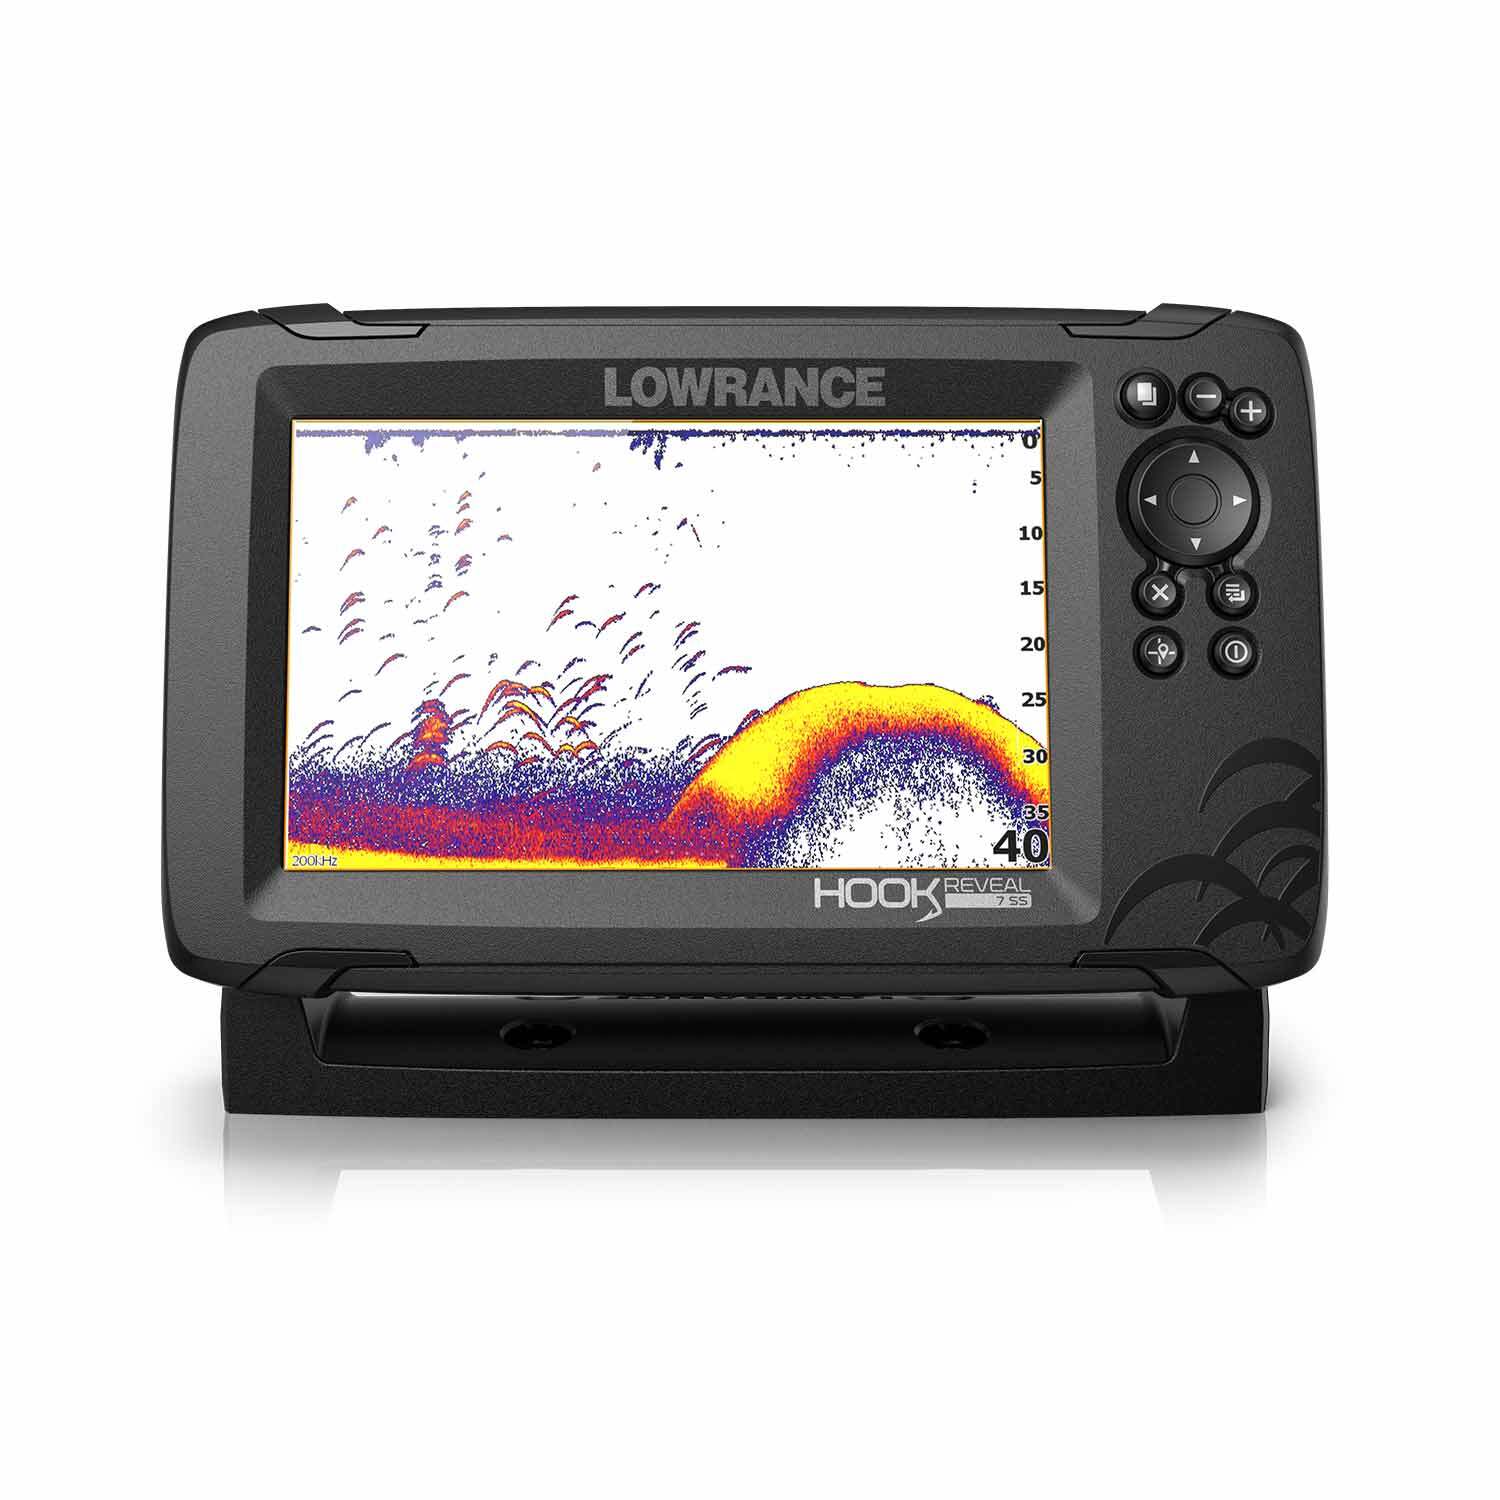 LOWRANCE HOOK Reveal 7 Fishfinder/Chartplotter Combo with 50/200 HDI  Transducer and C-MAP Contour Plus Charts